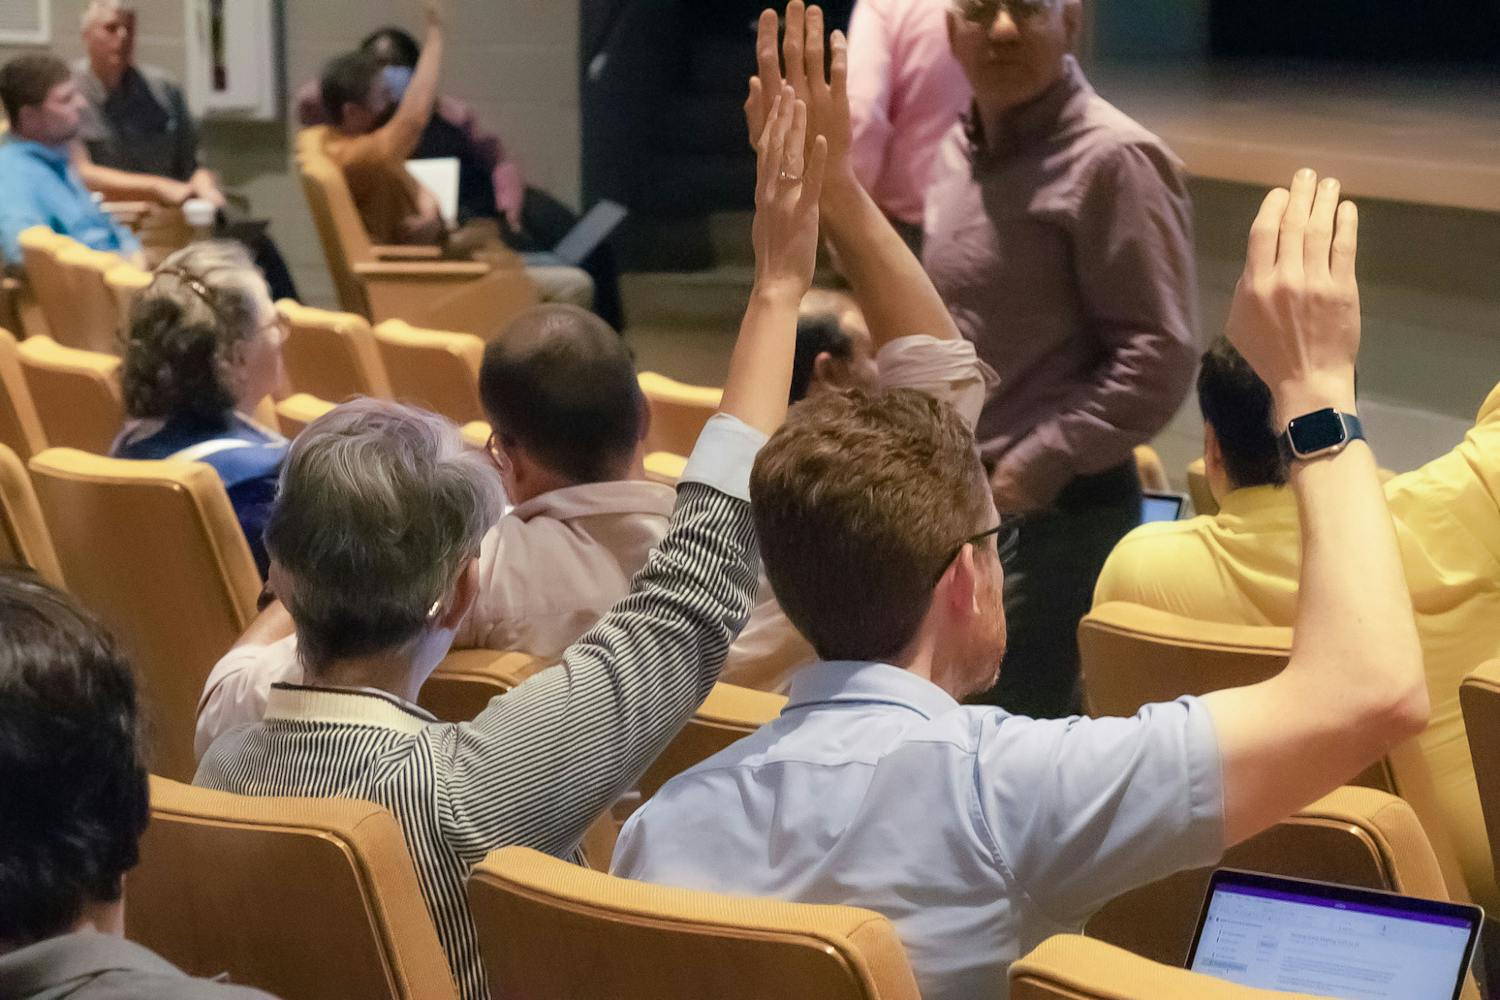 American Association of University Professors (AAUP) president Carol Harrison (left) and vice president Mark Minett (right) raise their hands to vote on a proposed amendment during the faculty senate meeting on April 19, 2023, in the Booker T. Washington Auditorium. Harrison spoke on the necessity for universities to prioritize the values they hold ɫɫƵs and faculty to.